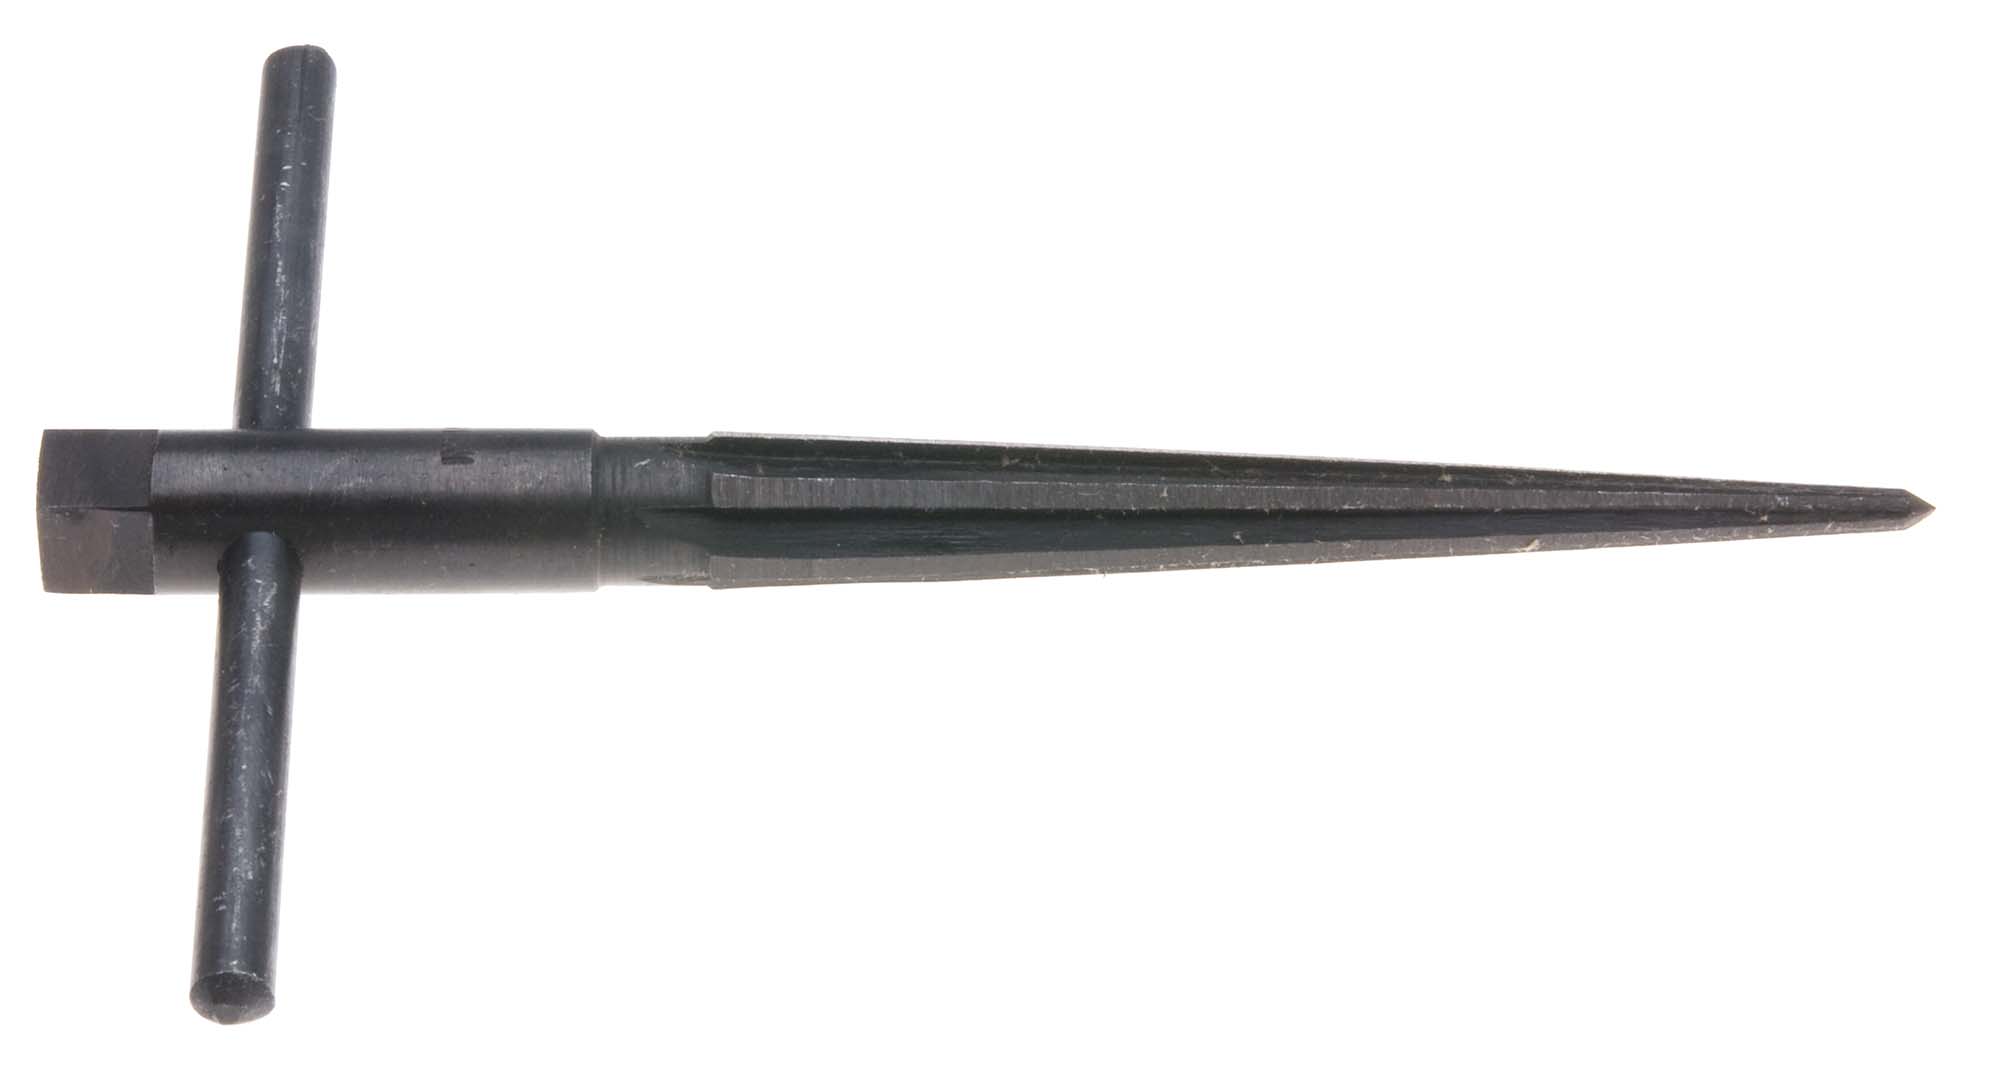 Repairmans Taper Reamer - Tapers from 1/8" to 1/2"